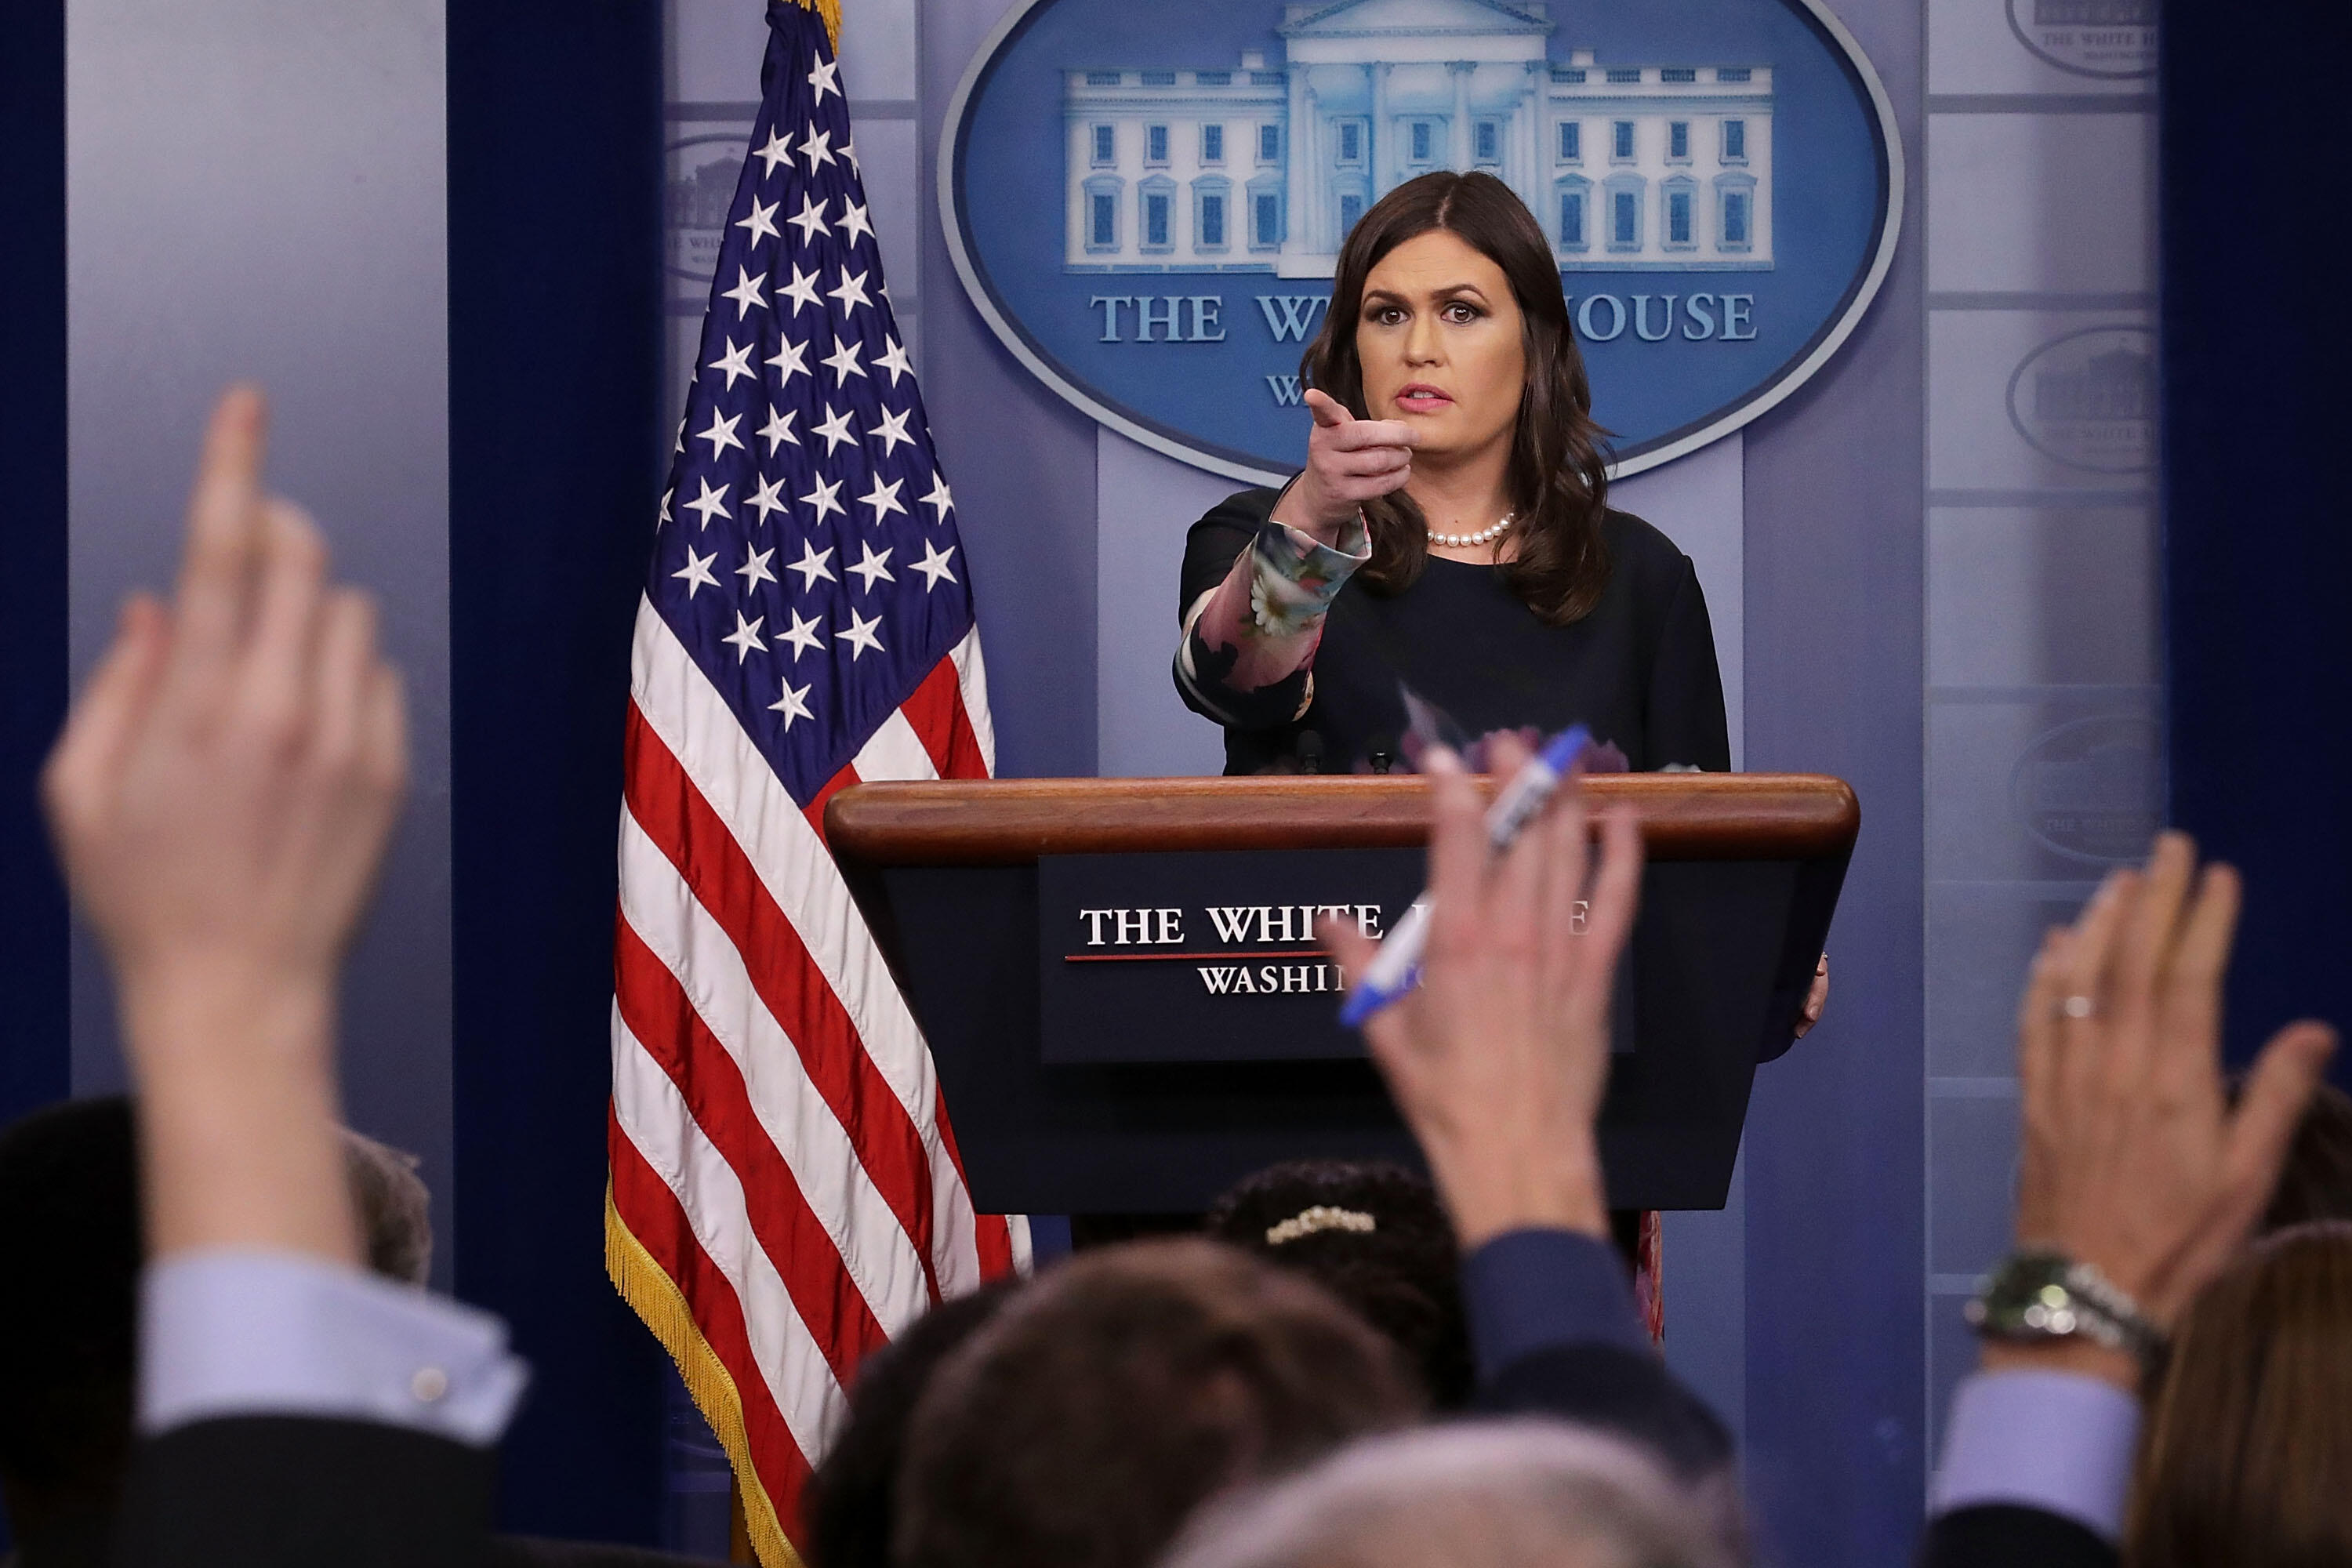 WASHINGTON, DC - NOVEMBER 17: White House Press Secretary Sarah Huckabee Sanders takes reporters' questions during a news conference in the Brady Press Briefing Room at the White House November 17, 2017, in Washington, DC. Huckabee fielded questions about sexual harassment allegations against Judge Roy Moore, Sen. Al Franken, and President Donald Trump. (Photo by Chip Somodevilla/Getty Images)